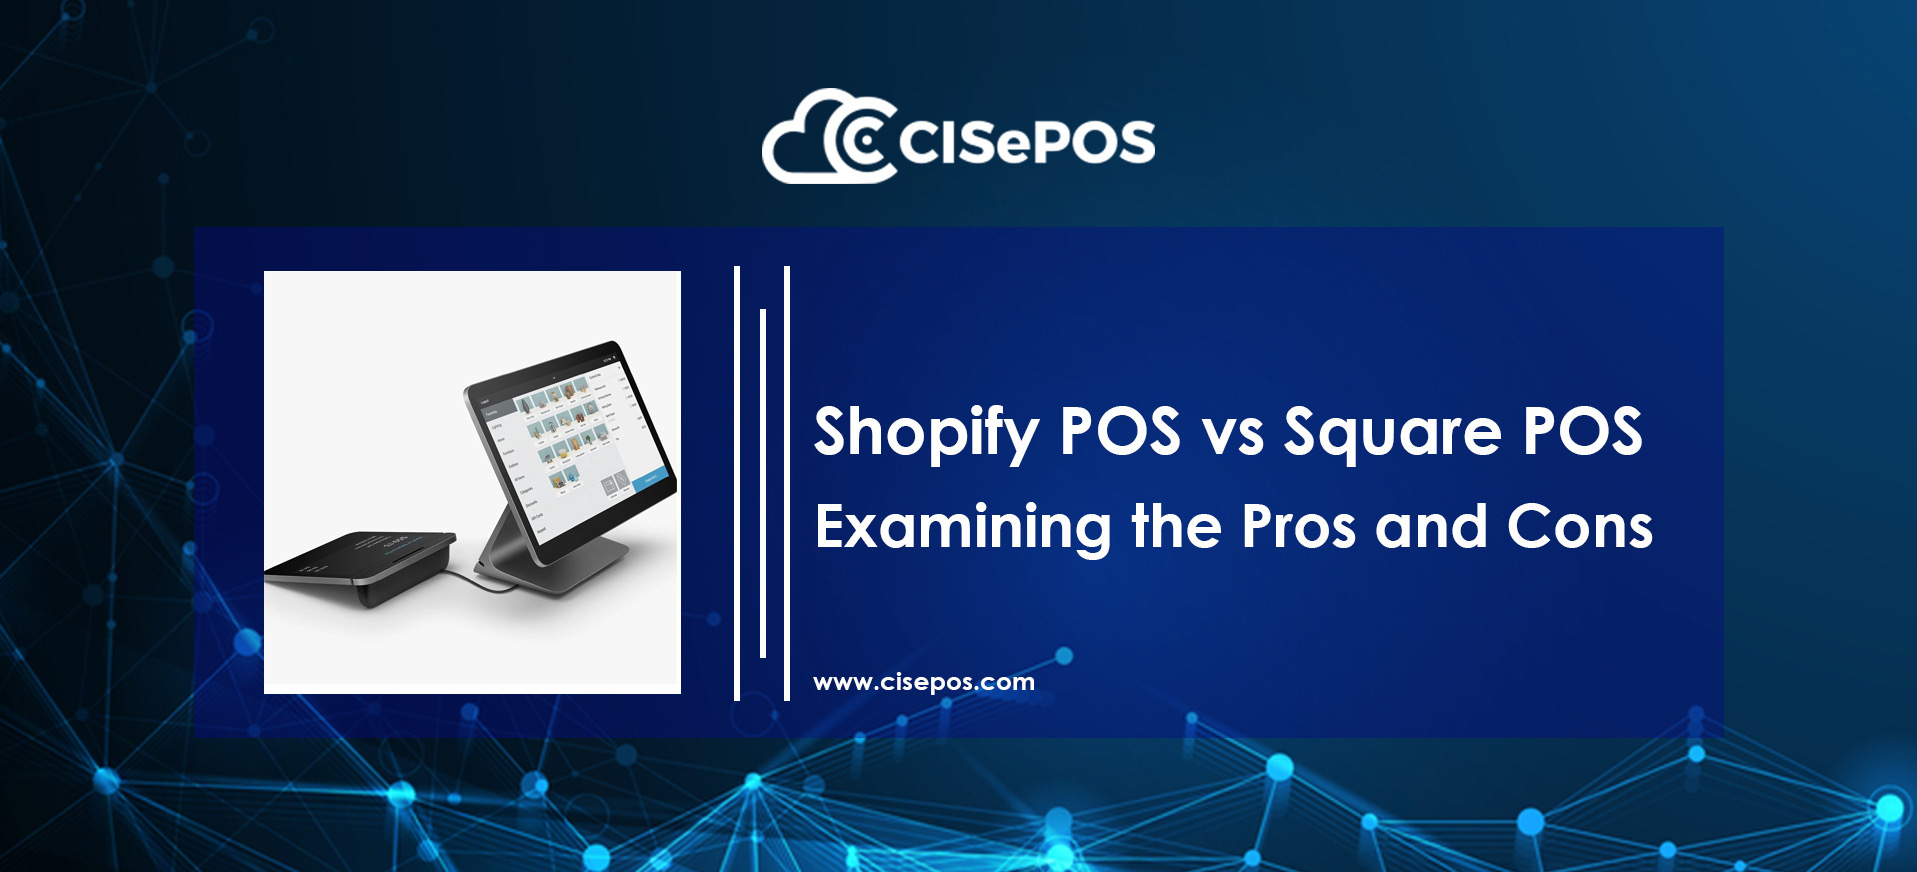 Shopify POS vs Square POS: Examining the Pros and Cons